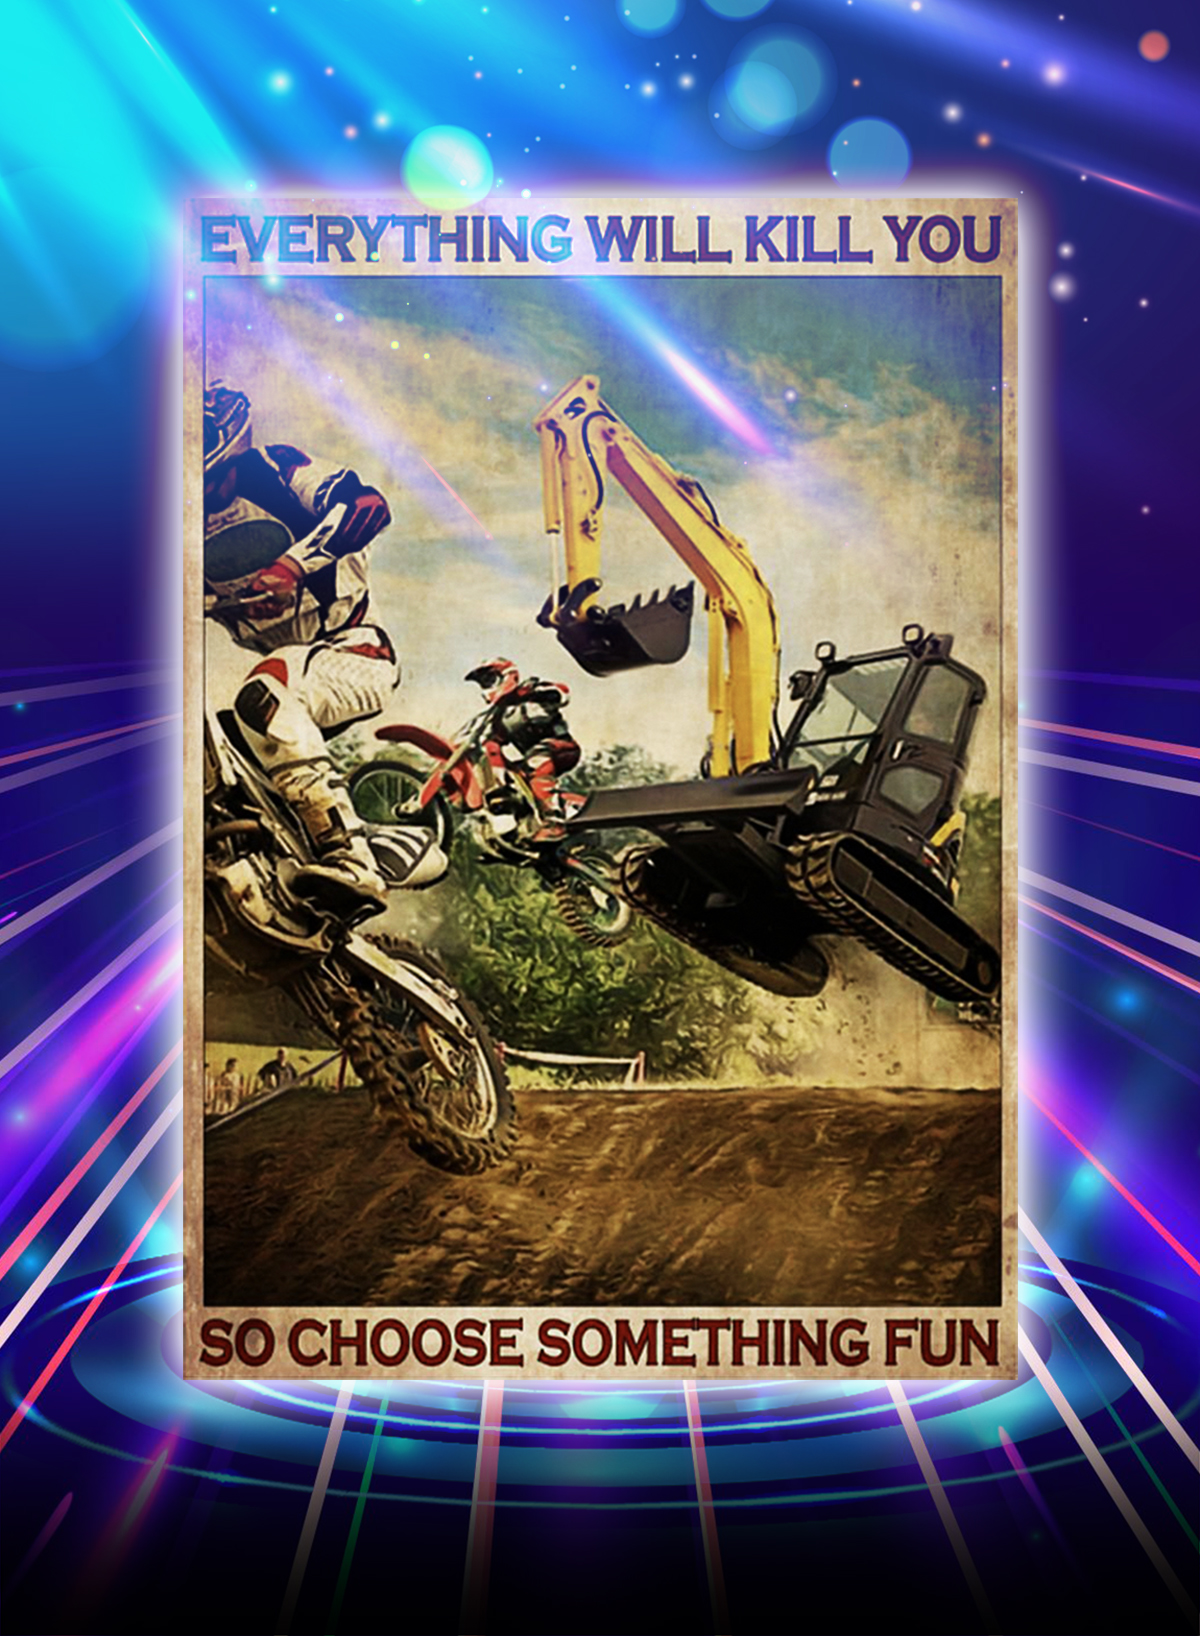 Motocross and excavator everything will kill you so choose something fun poster - A1